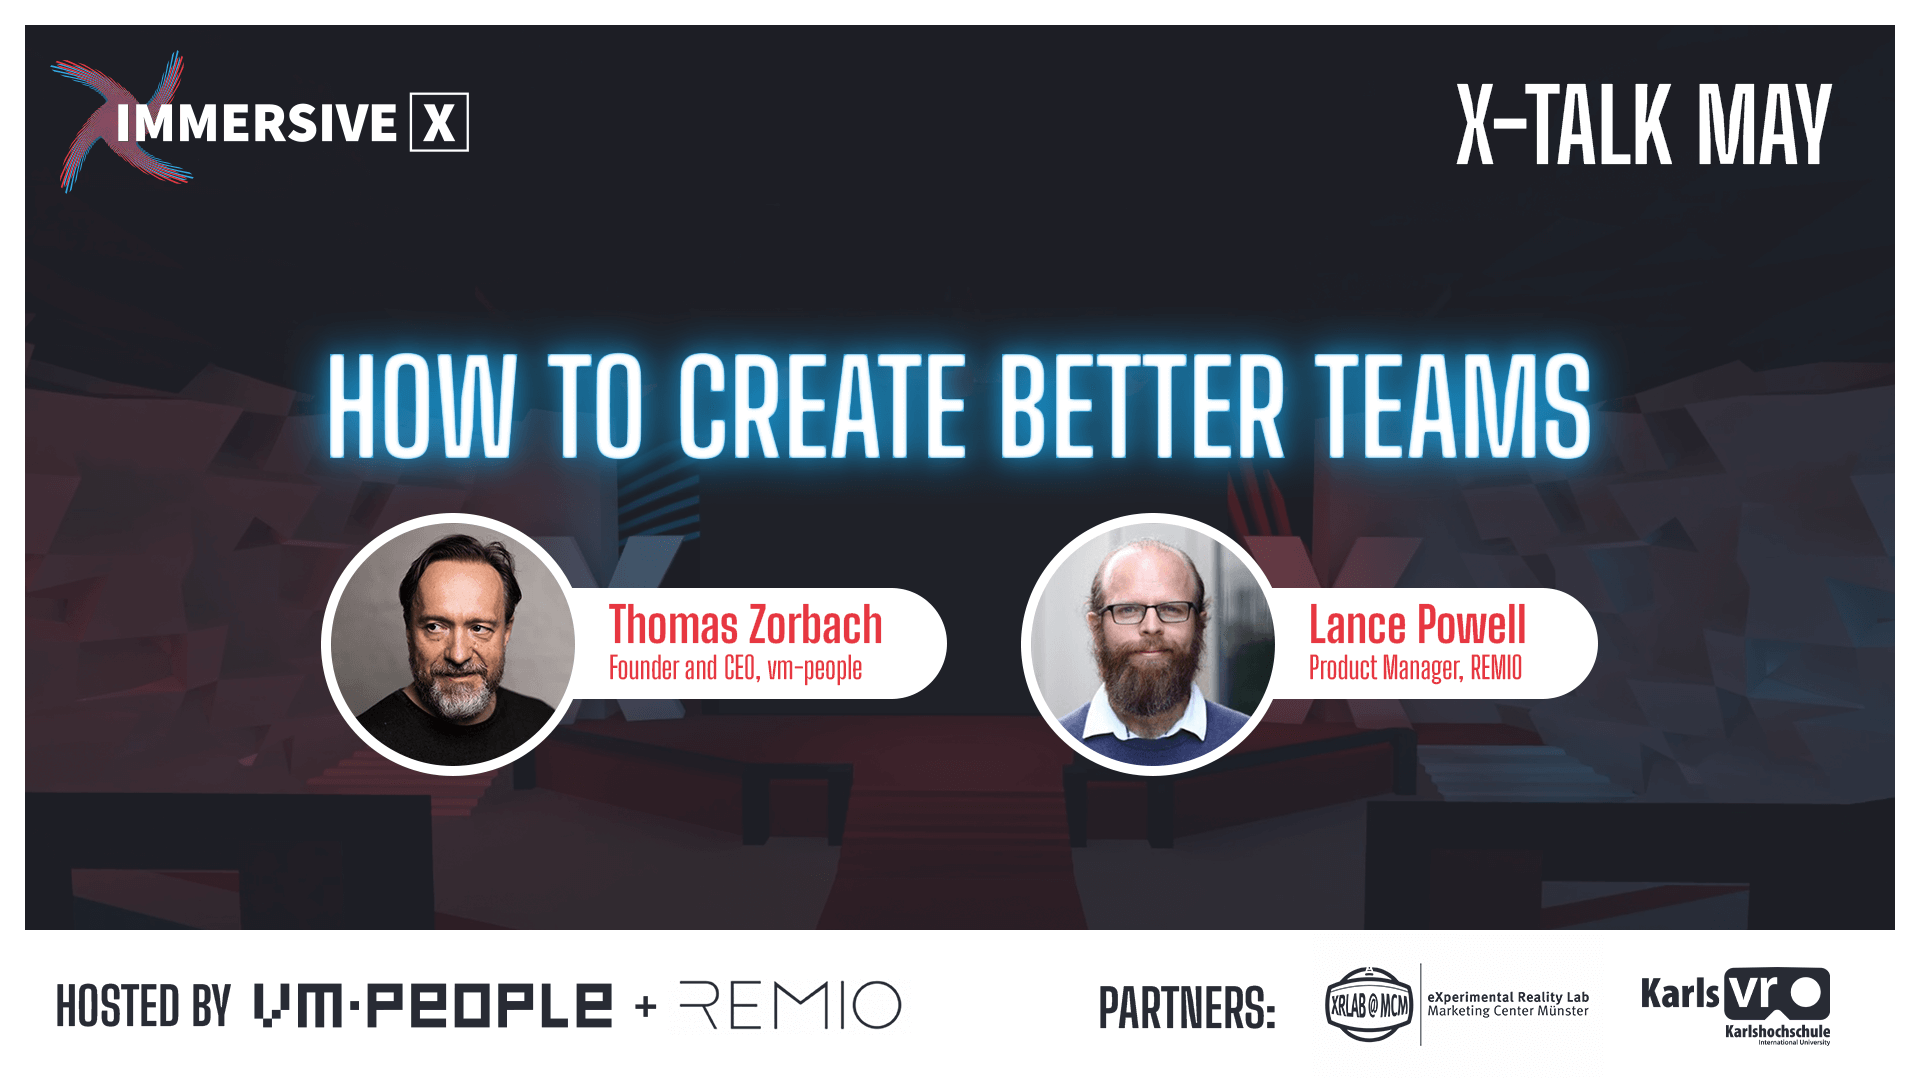 How to create better teams